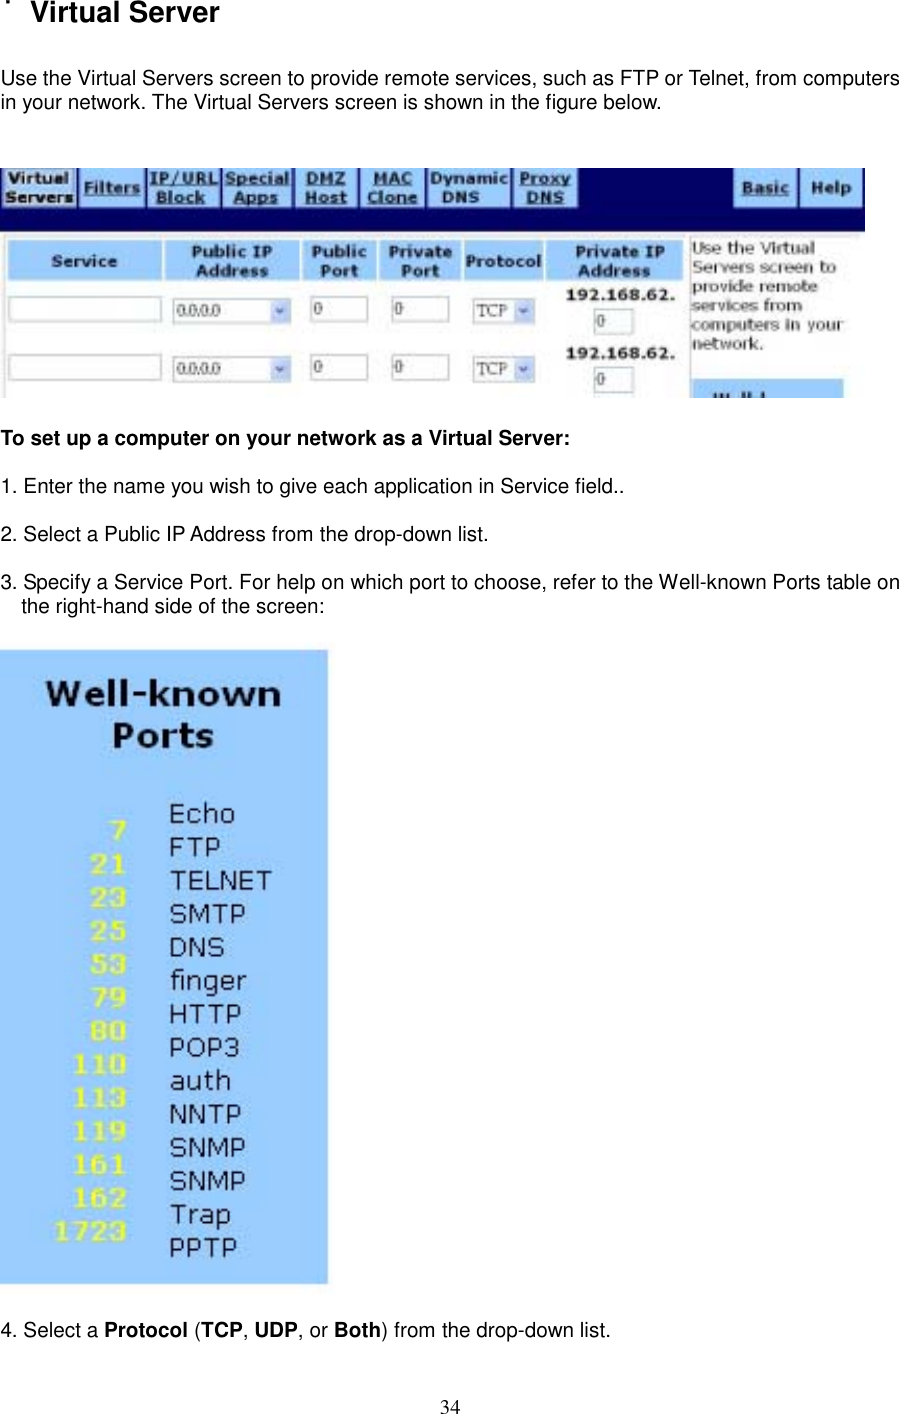  34˙Virtual Server  Use the Virtual Servers screen to provide remote services, such as FTP or Telnet, from computers in your network. The Virtual Servers screen is shown in the figure below.    To set up a computer on your network as a Virtual Server:  1. Enter the name you wish to give each application in Service field..   2. Select a Public IP Address from the drop-down list.  3. Specify a Service Port. For help on which port to choose, refer to the Well-known Ports table on the right-hand side of the screen:      4. Select a Protocol (TCP, UDP, or Both) from the drop-down list. 